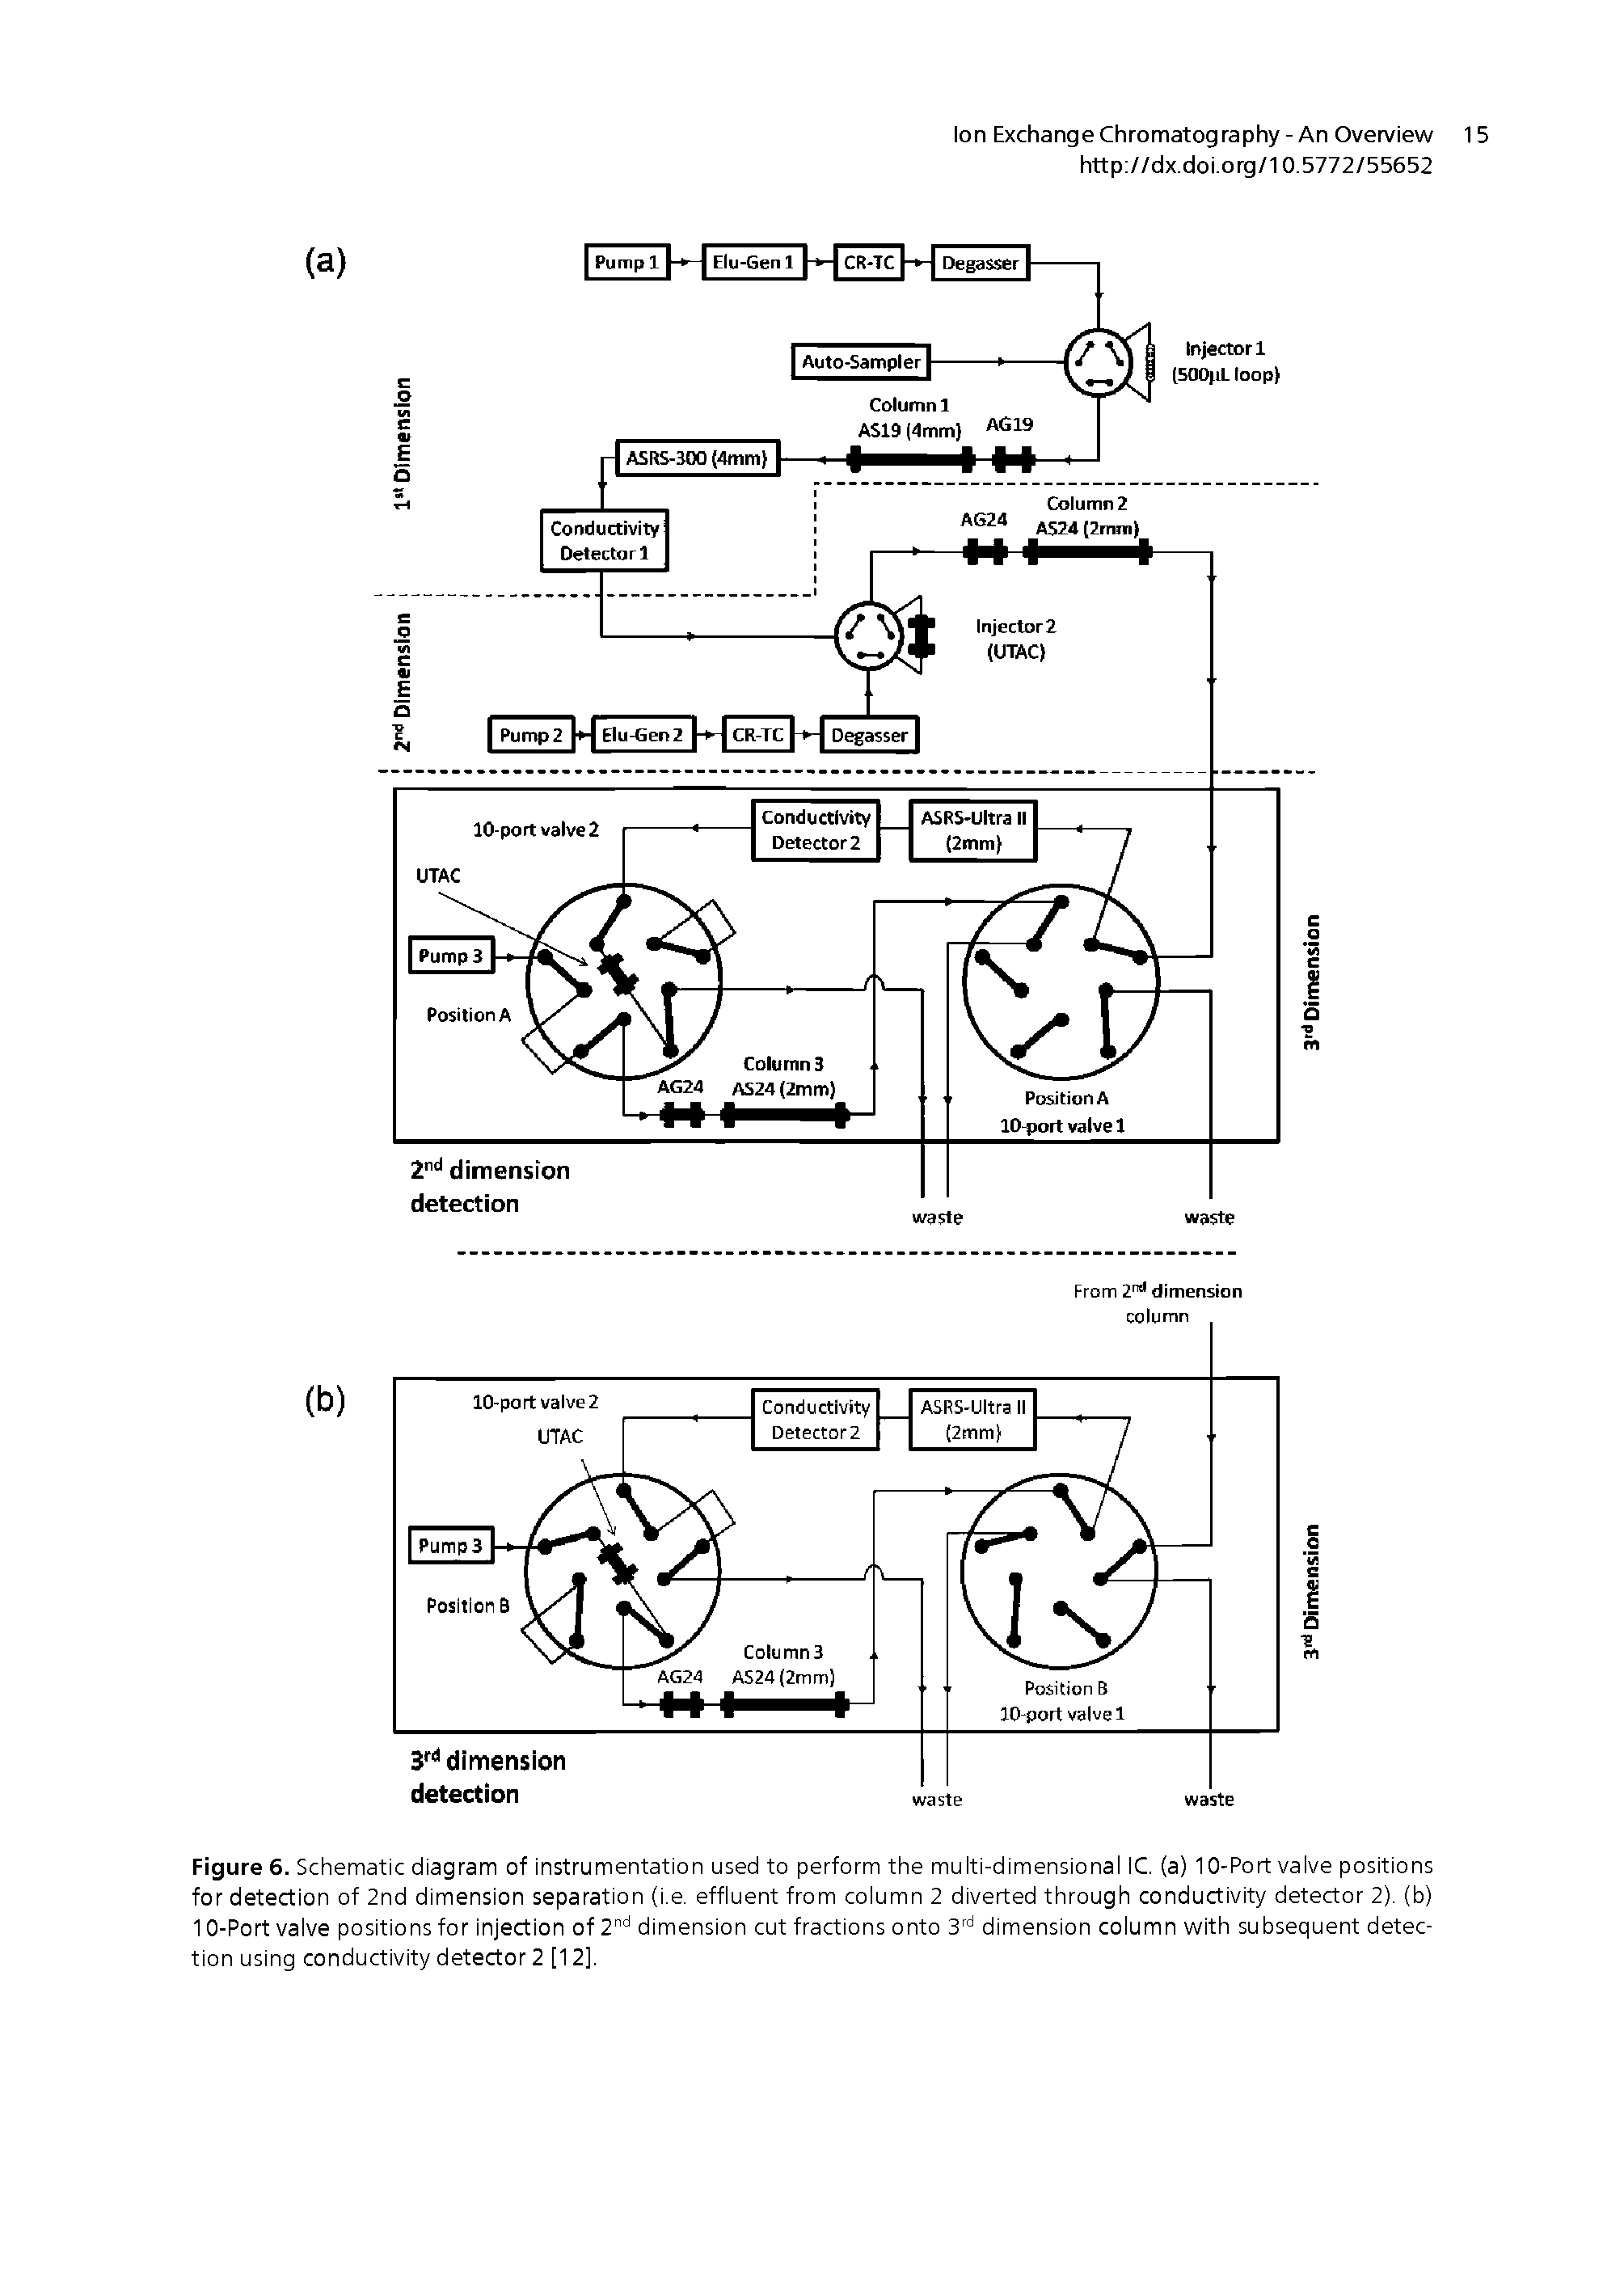 Figure 6. Schematic diagram of instrumentation used to perform the multi-dimensional 1C. (a) 10-Port valve positions for detection of 2nd dimension separation (i.e. effluent from column 2 diverted through conductivity detector 2). (b) 10-Port valve positions for injection of 2 dimension cut fractions onto 3 dimension column with subsequent detection using conductivity detector 2 [12],...